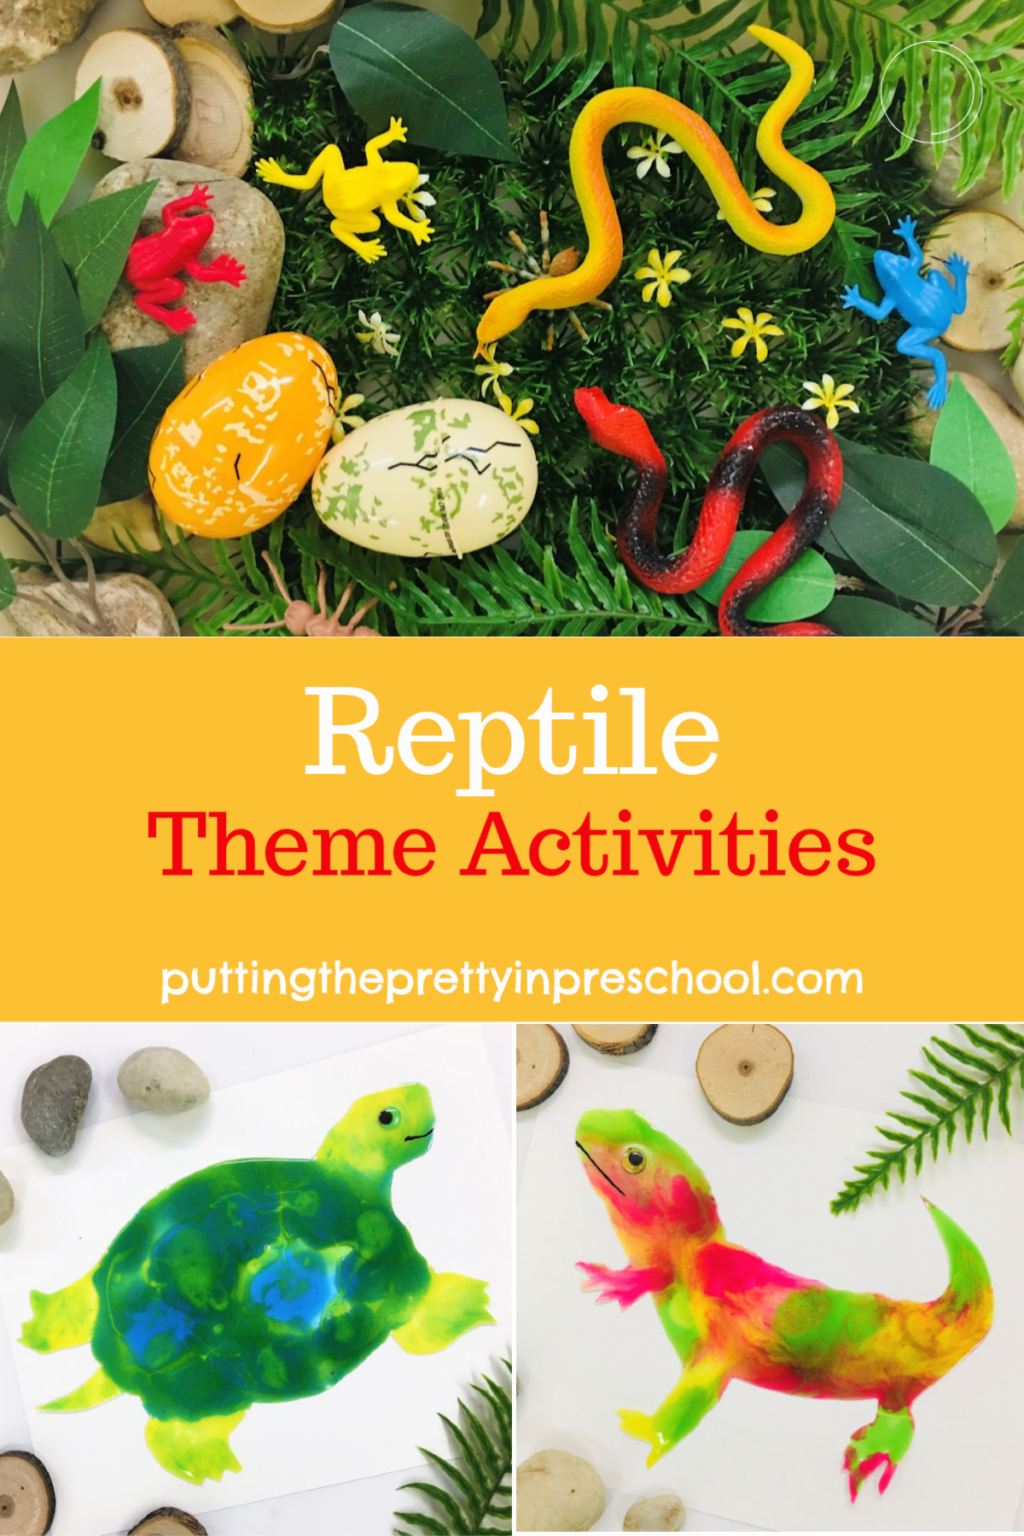 reptile-theme-activities-putting-the-pretty-in-preschool